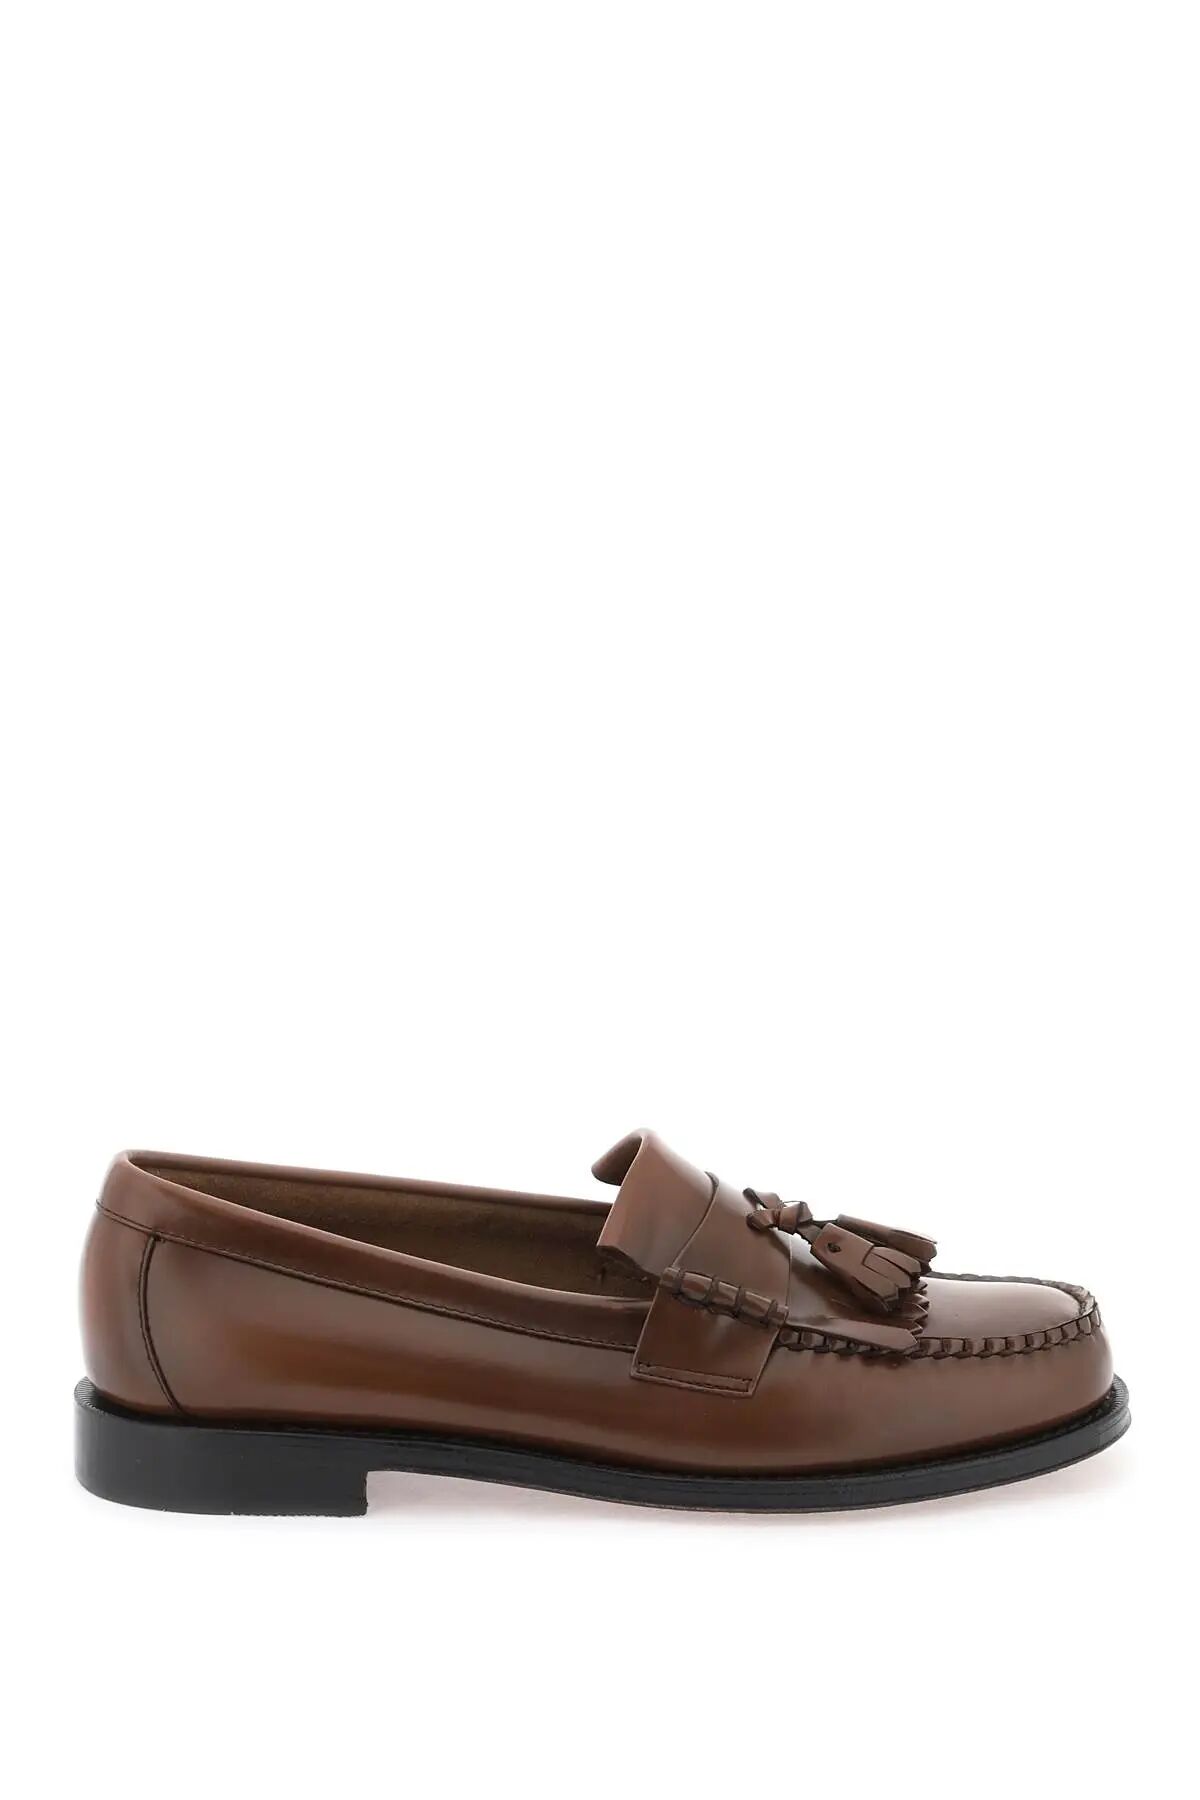 G.H. BASS Esther Kiltie Weejuns loafers  - Brown - male - Size: 41